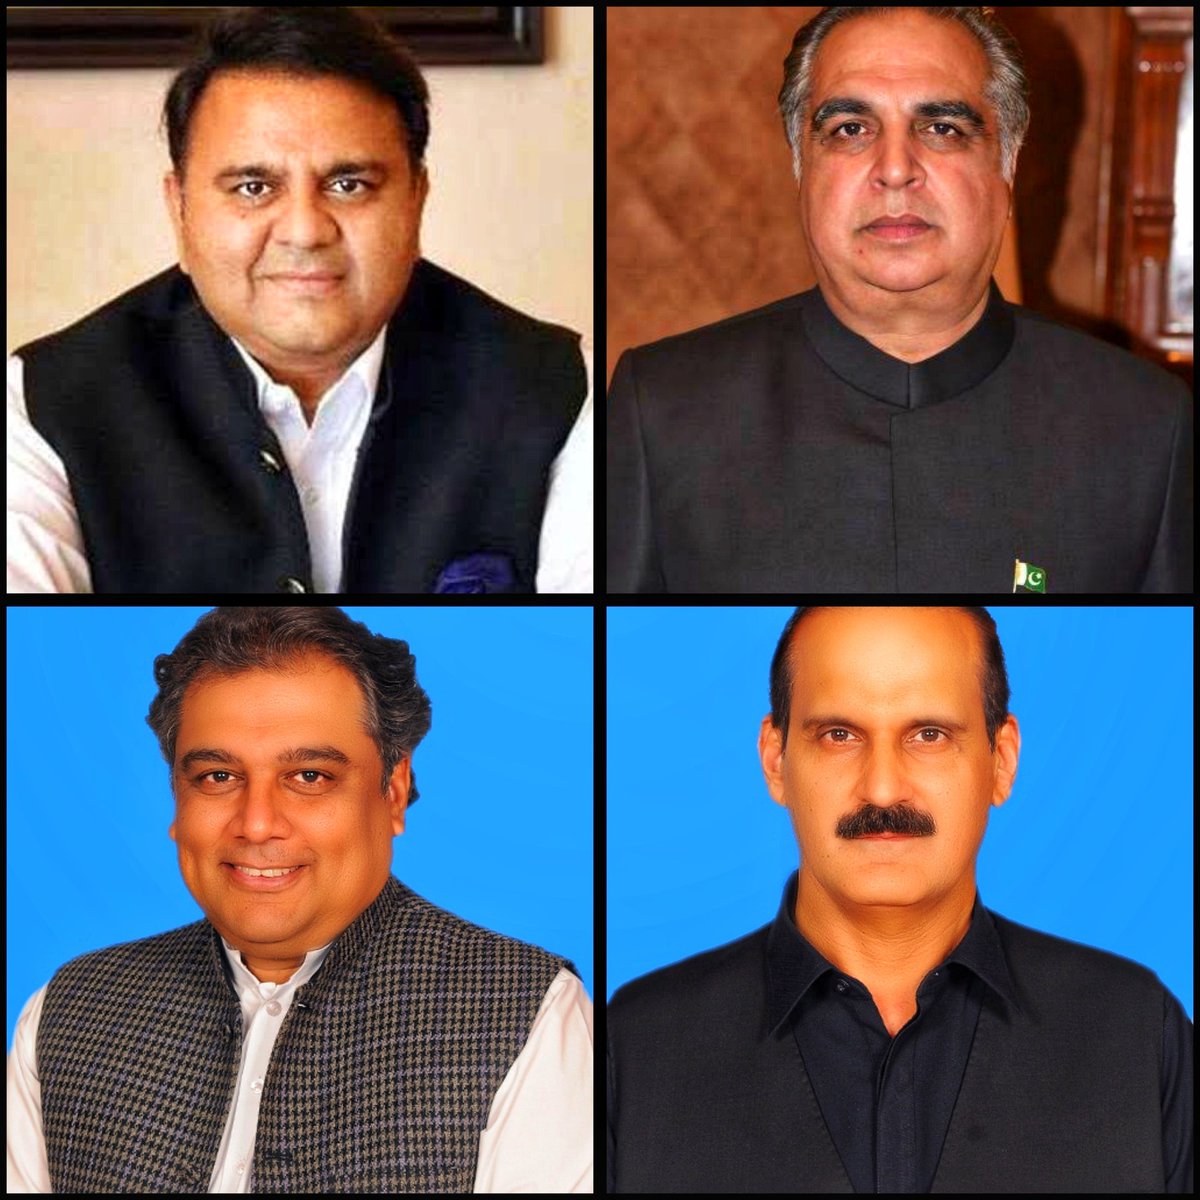 The Four Opportunistic Lotas Namely Fawad Chaudhry, Imran Ismail, Aamer Kiani and Ali Zaidi have Betrayed Our Imran Khan and Sold Themselves to Jahangir Tareen. The Public Should Never Vote for Such Filths!